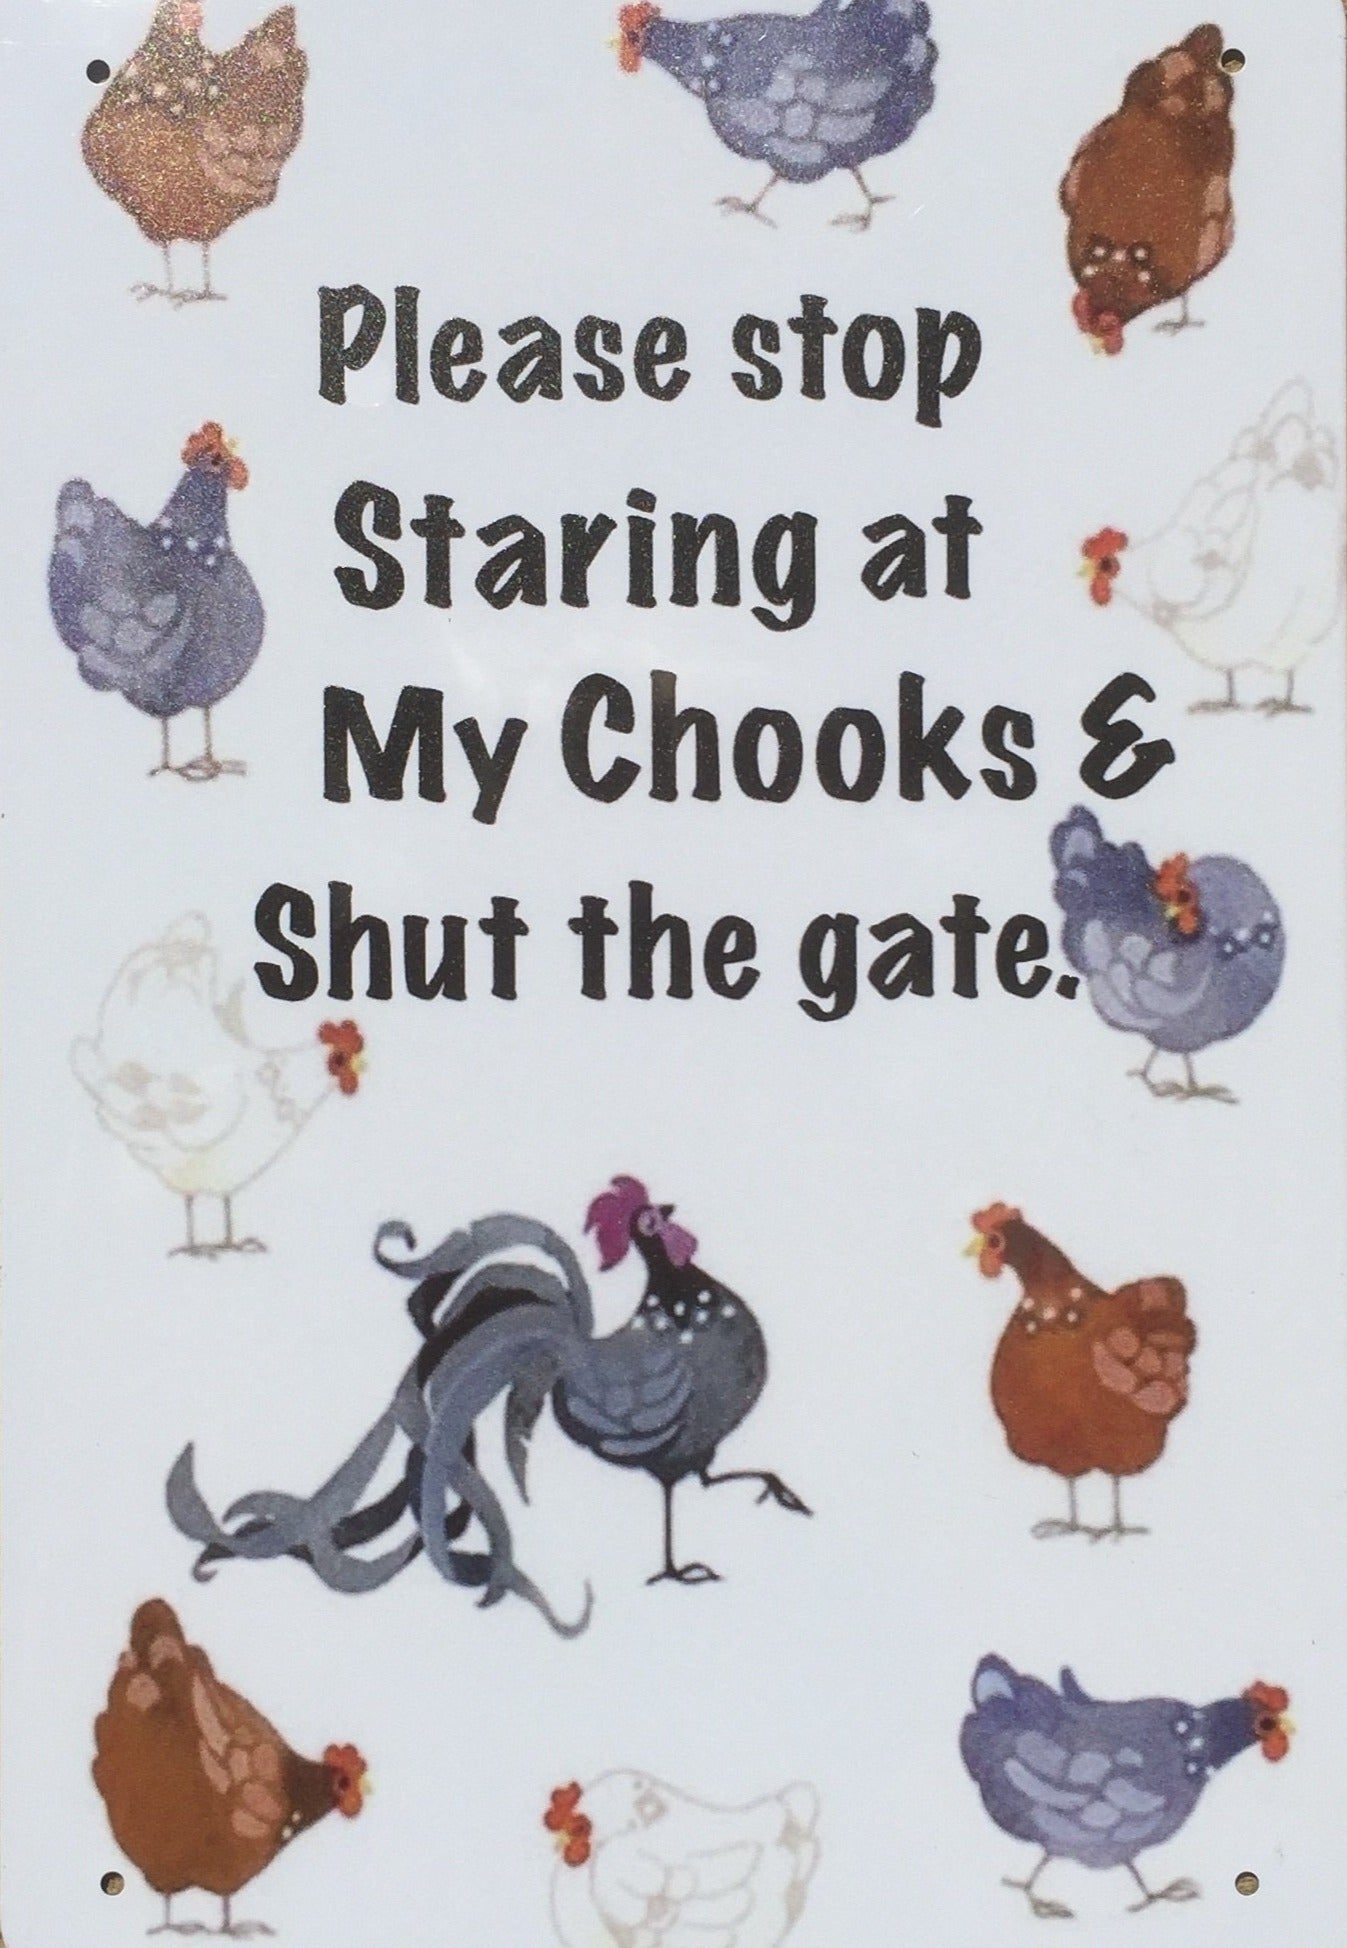 Please stop staring at my chooks and shut the gate